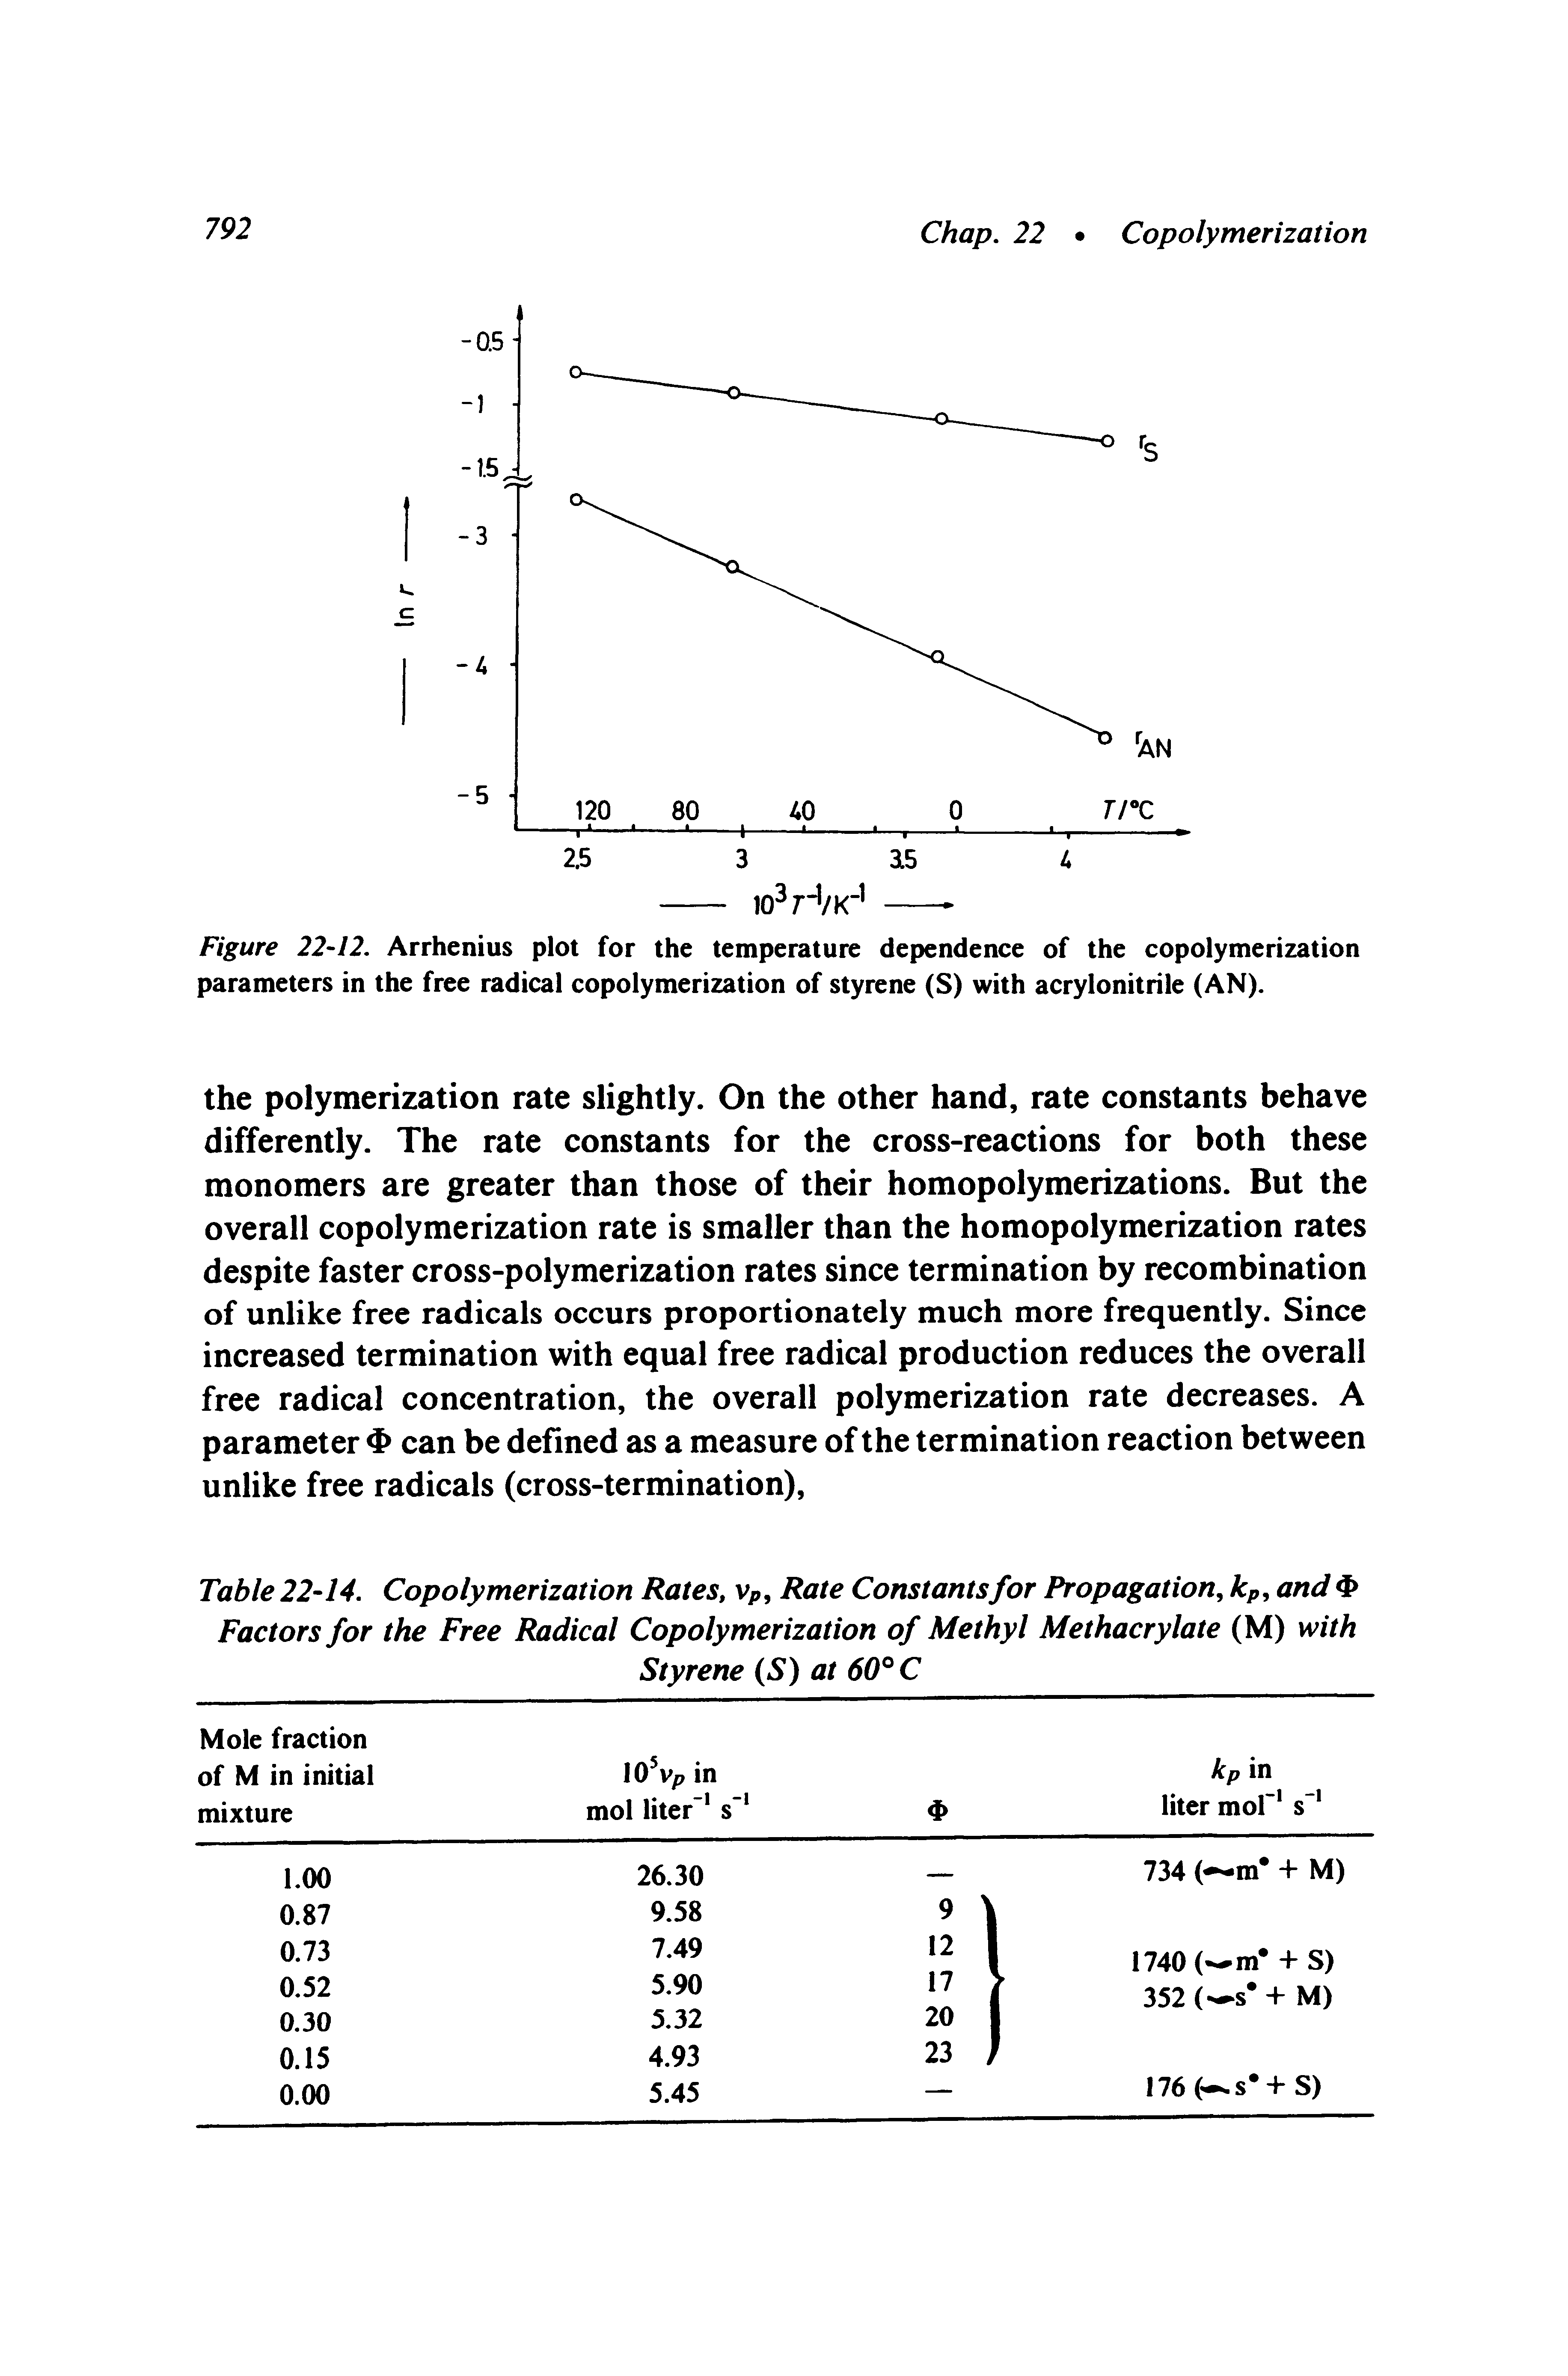 Figure 22-12. Arrhenius plot for the temperature dependence of the copolymerization parameters in the free radical copolymerization of styrene (S) with acrylonitrile (AN).